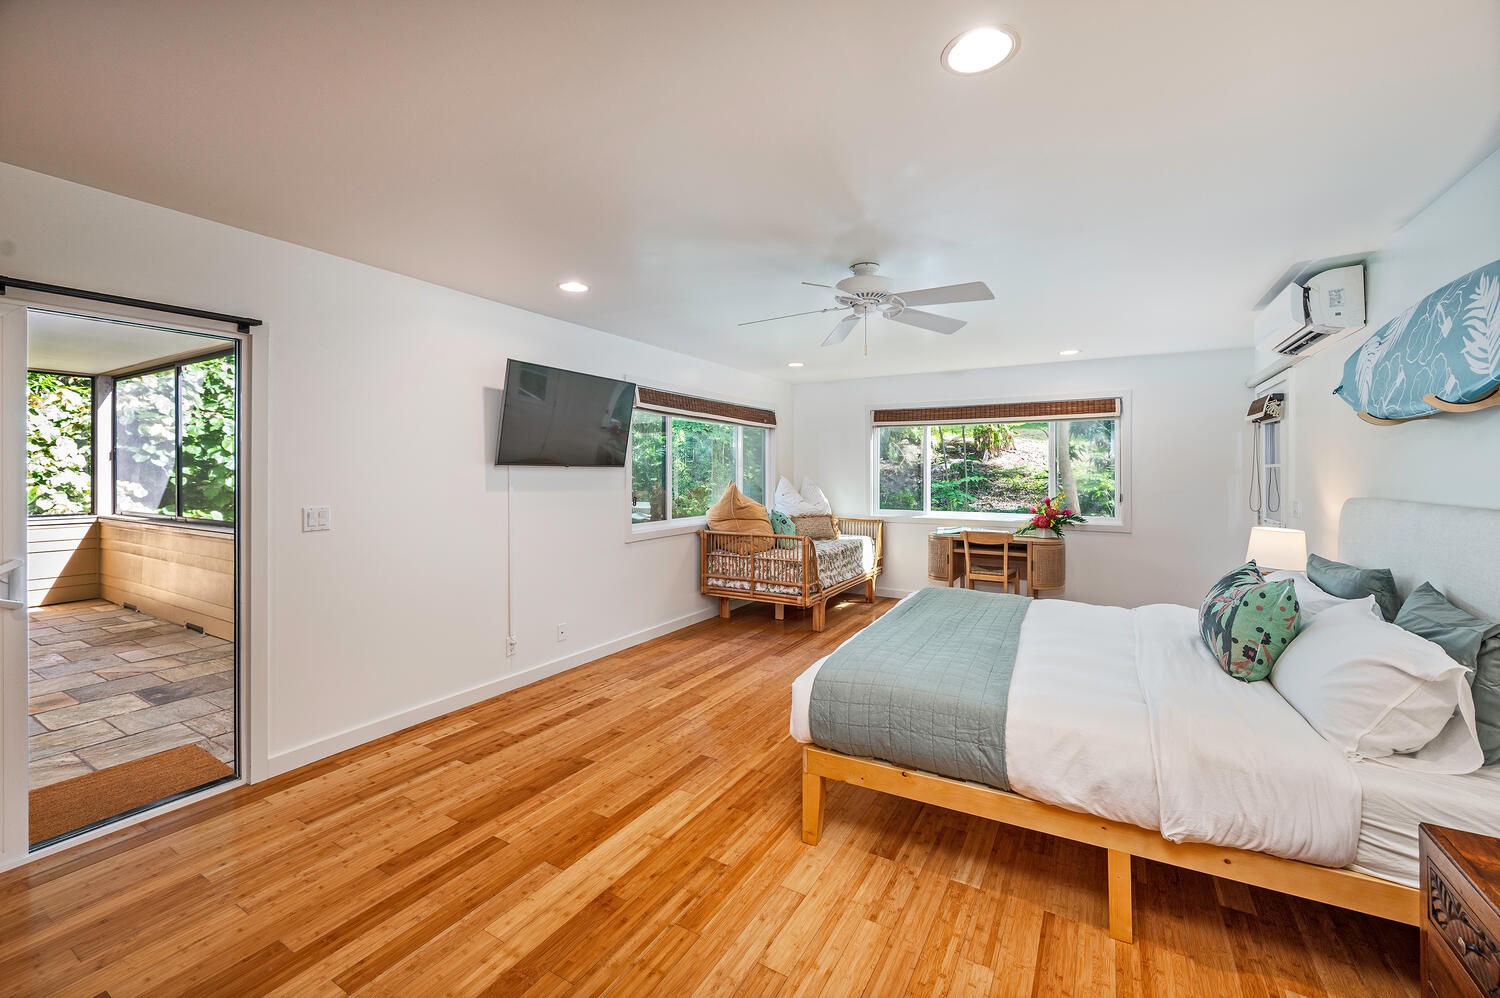 Kailua Vacation Rentals, Hale Honi La - Lower level primary with a private entrance.